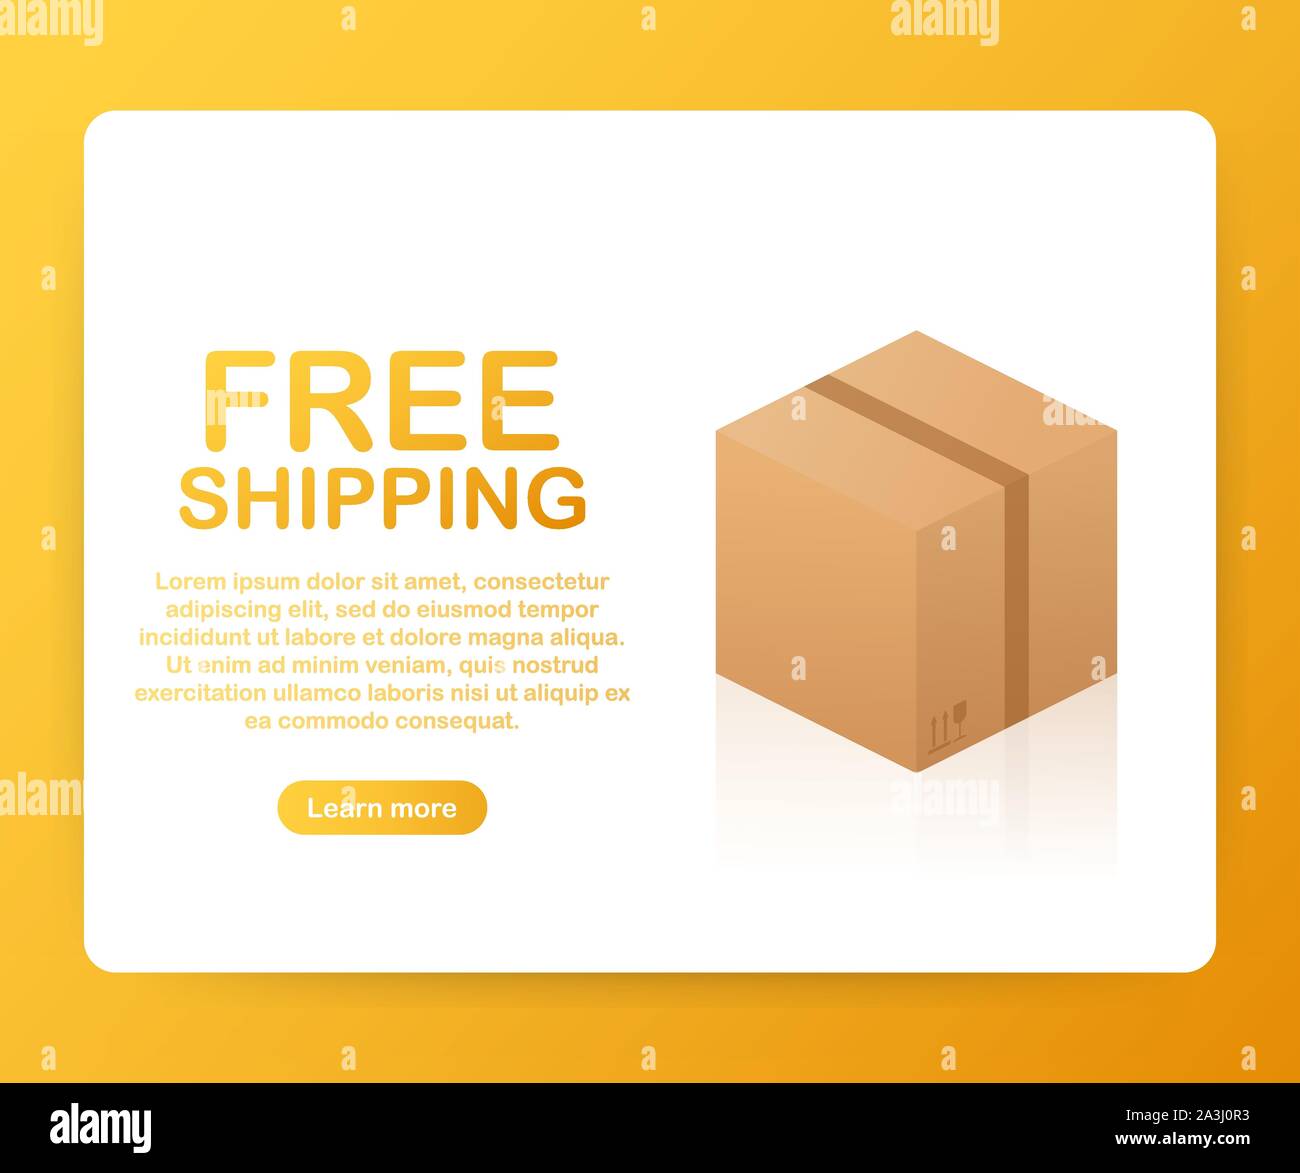 Free Shipping Cardboard Box. Businesses, Online Store, Online Retail, Company, Promotion. Vector stock illustration. Stock Vector